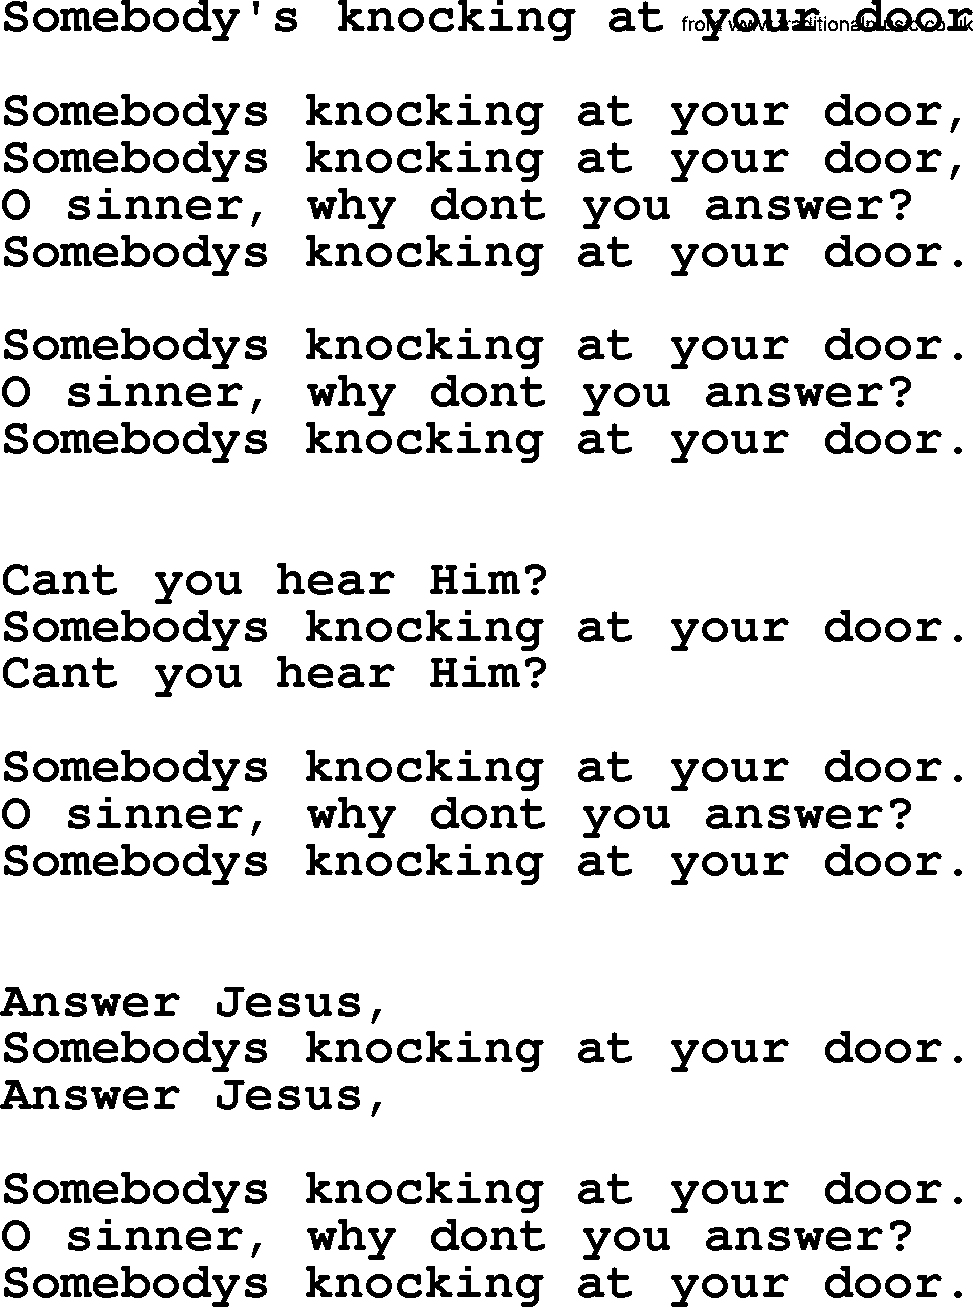 Presbyterian Hymns collection, Hymn: Somebody's Knocking At Your Door, lyrics and PDF